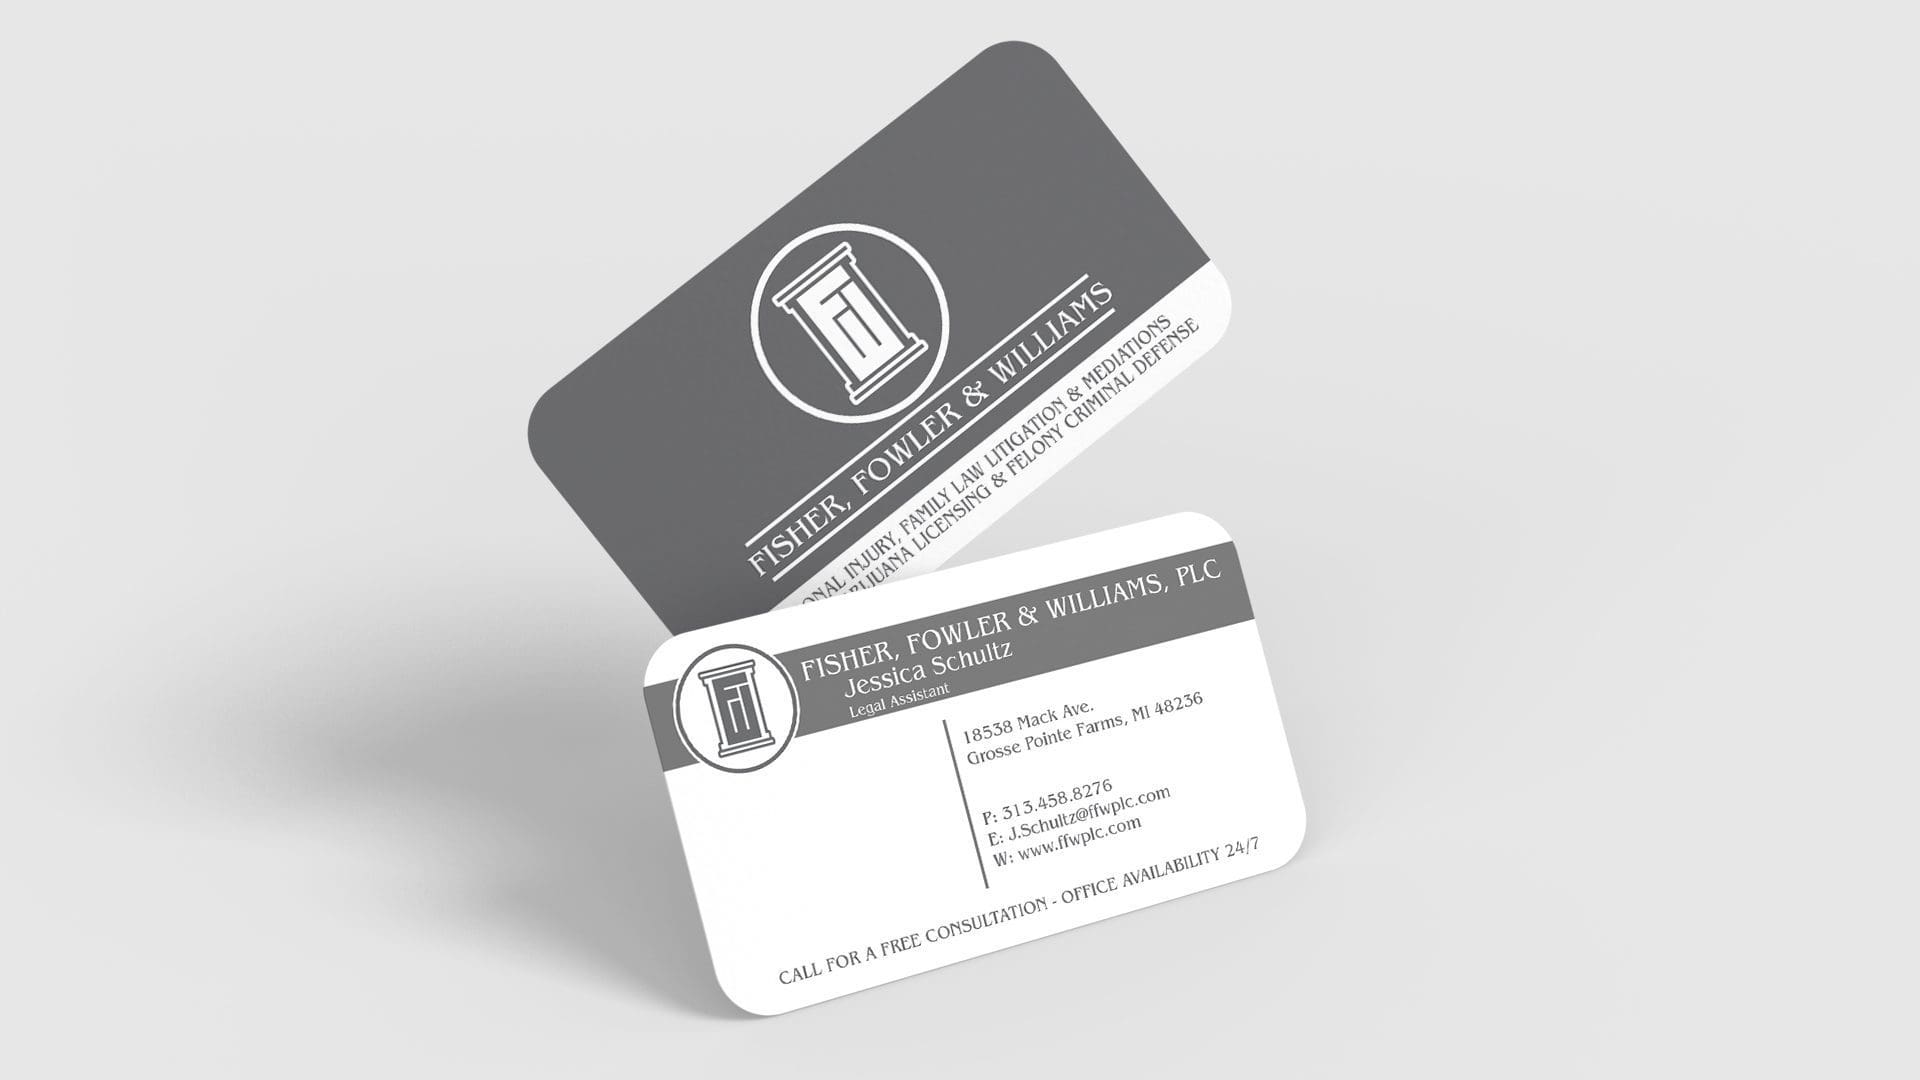 Fowler and Williams – Matte Business Card with Rounded Corners Mockup 04